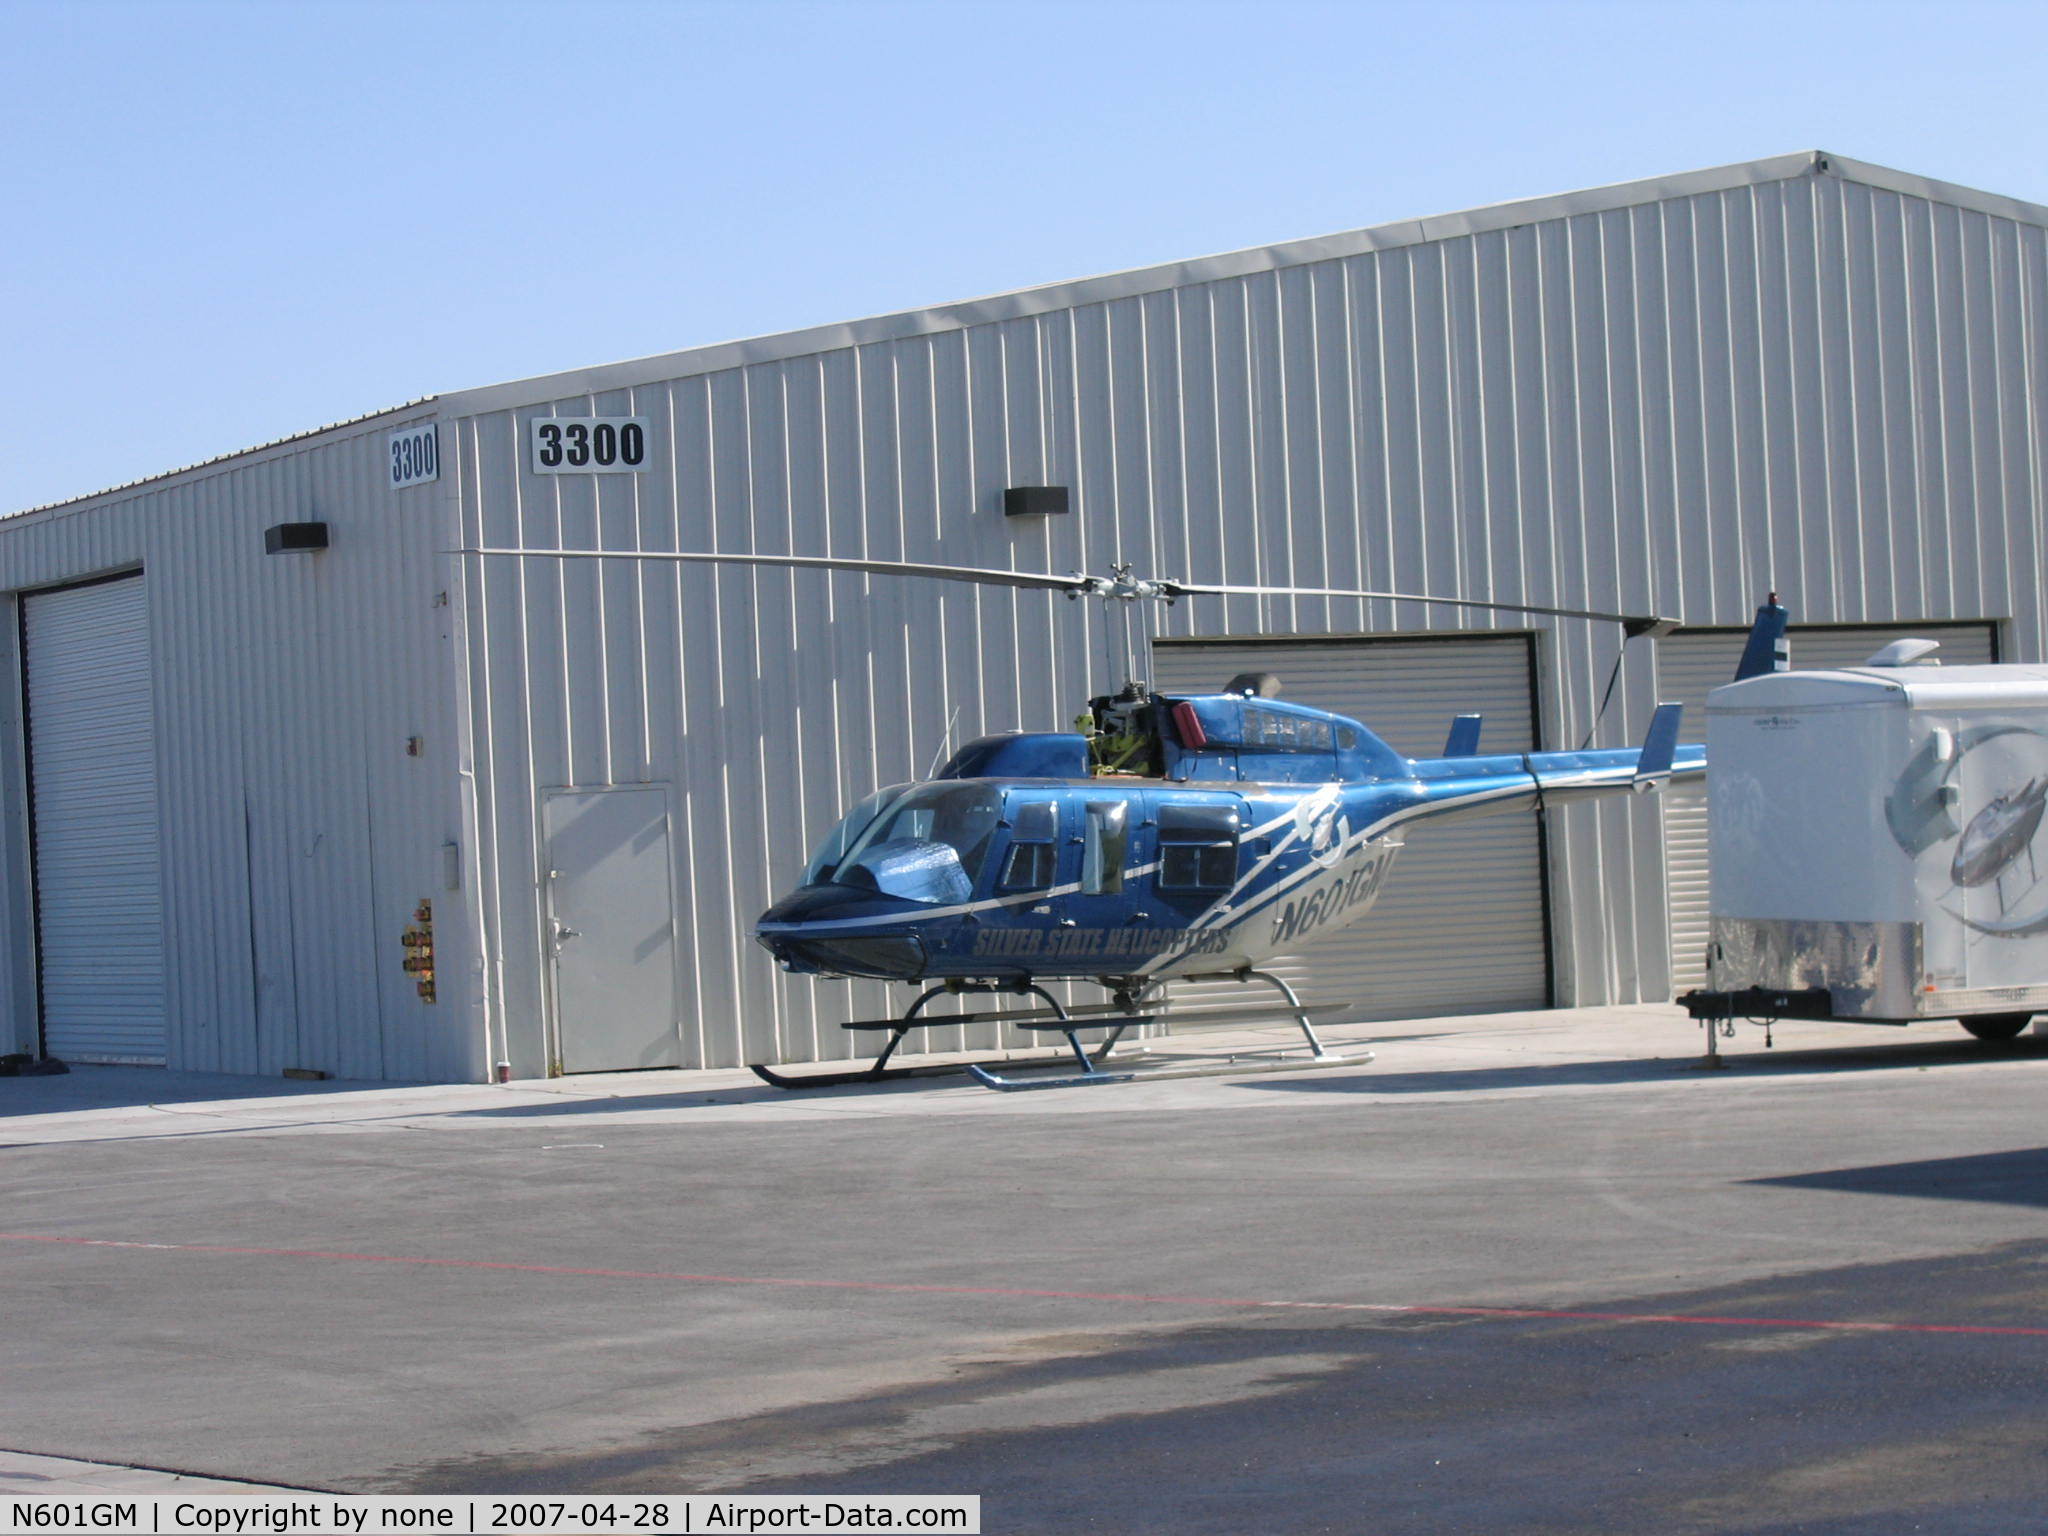 N601GM, 1981 Bell 206L-1 LongRanger II C/N 45638, Bell 206-L1 at Silver State Helicopters Headquarters.